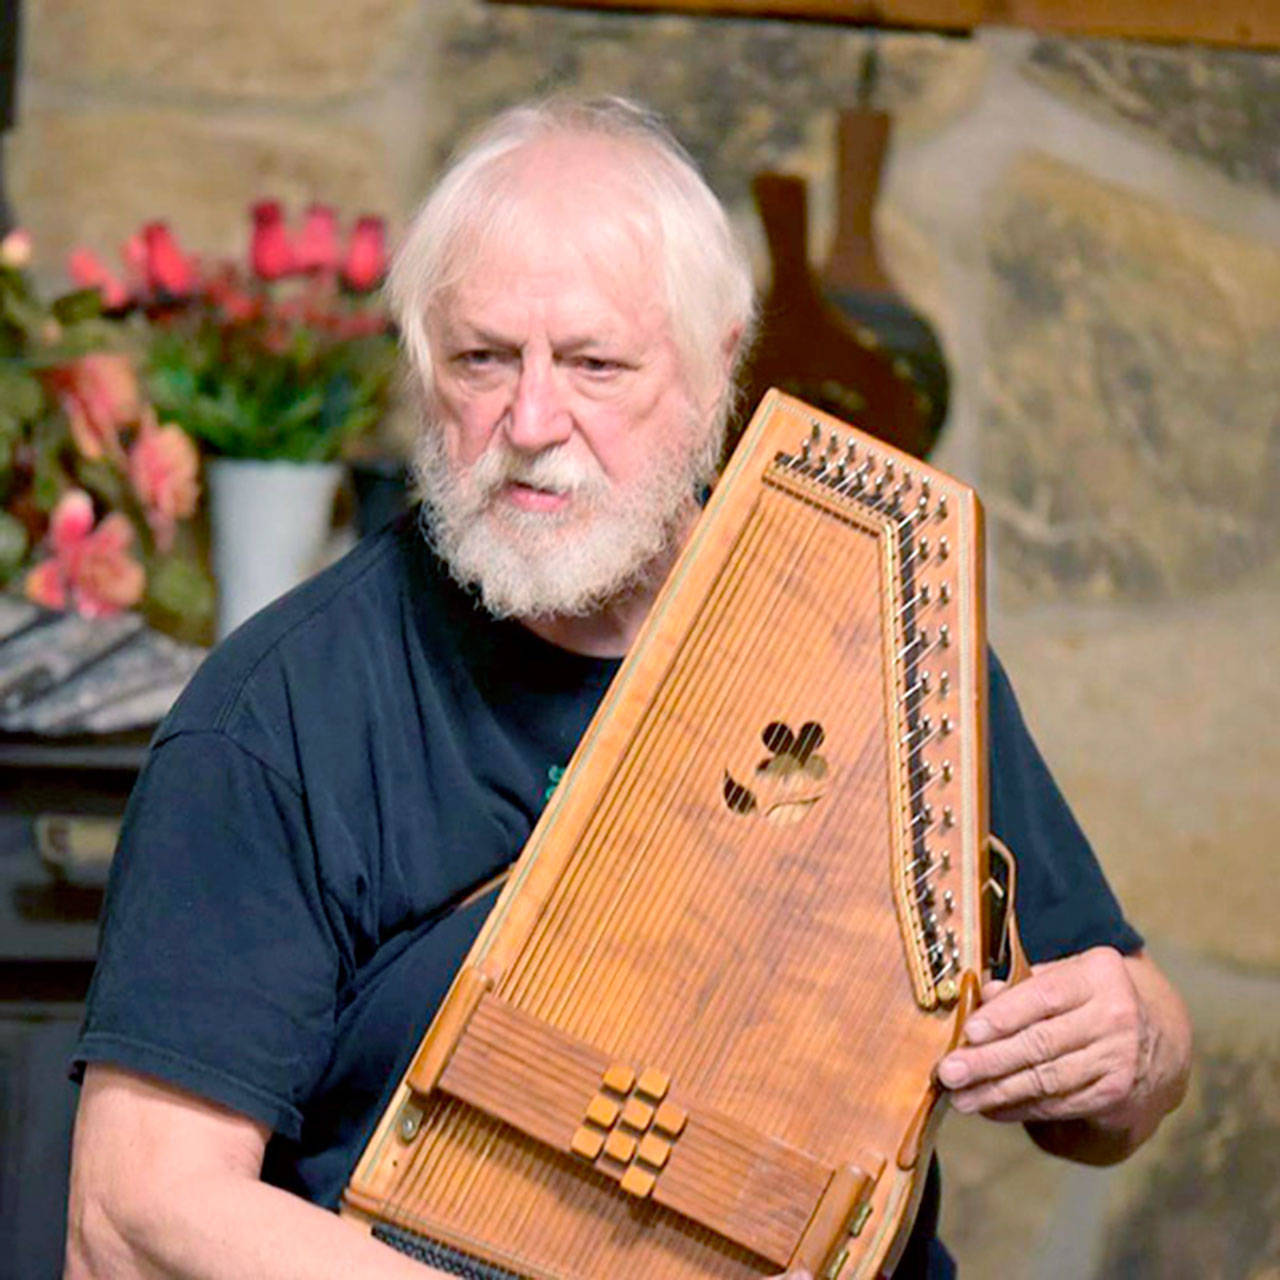 Bryan Bowers will accompany himself on the autoharp for his folk songs when he performs in Coyle on Saturday.